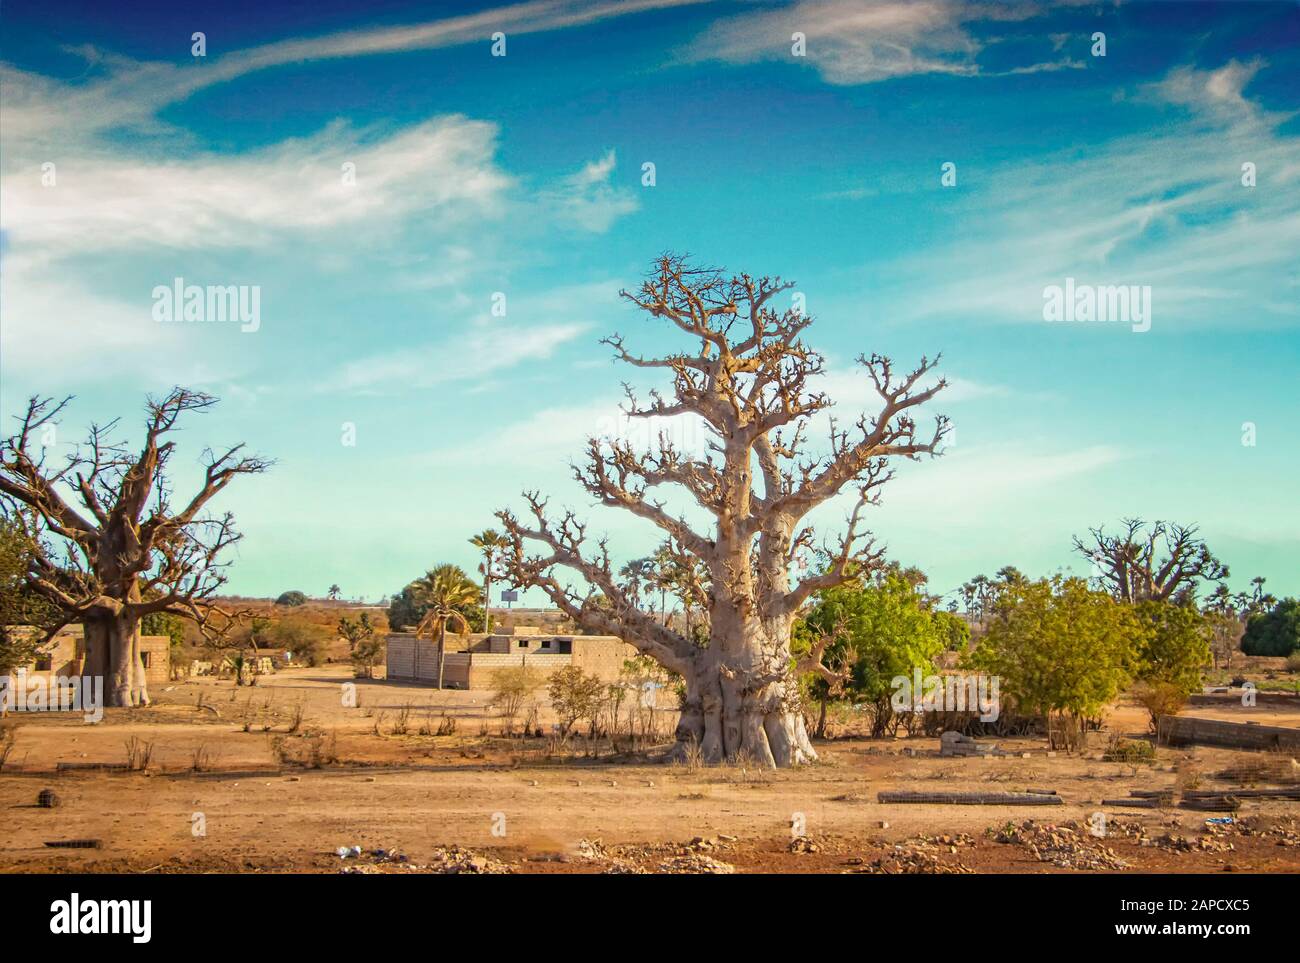 African savanna with typical baobab tree in Senegal, Africa. It's near Dakar. In the background is a blue sky. Stock Photo